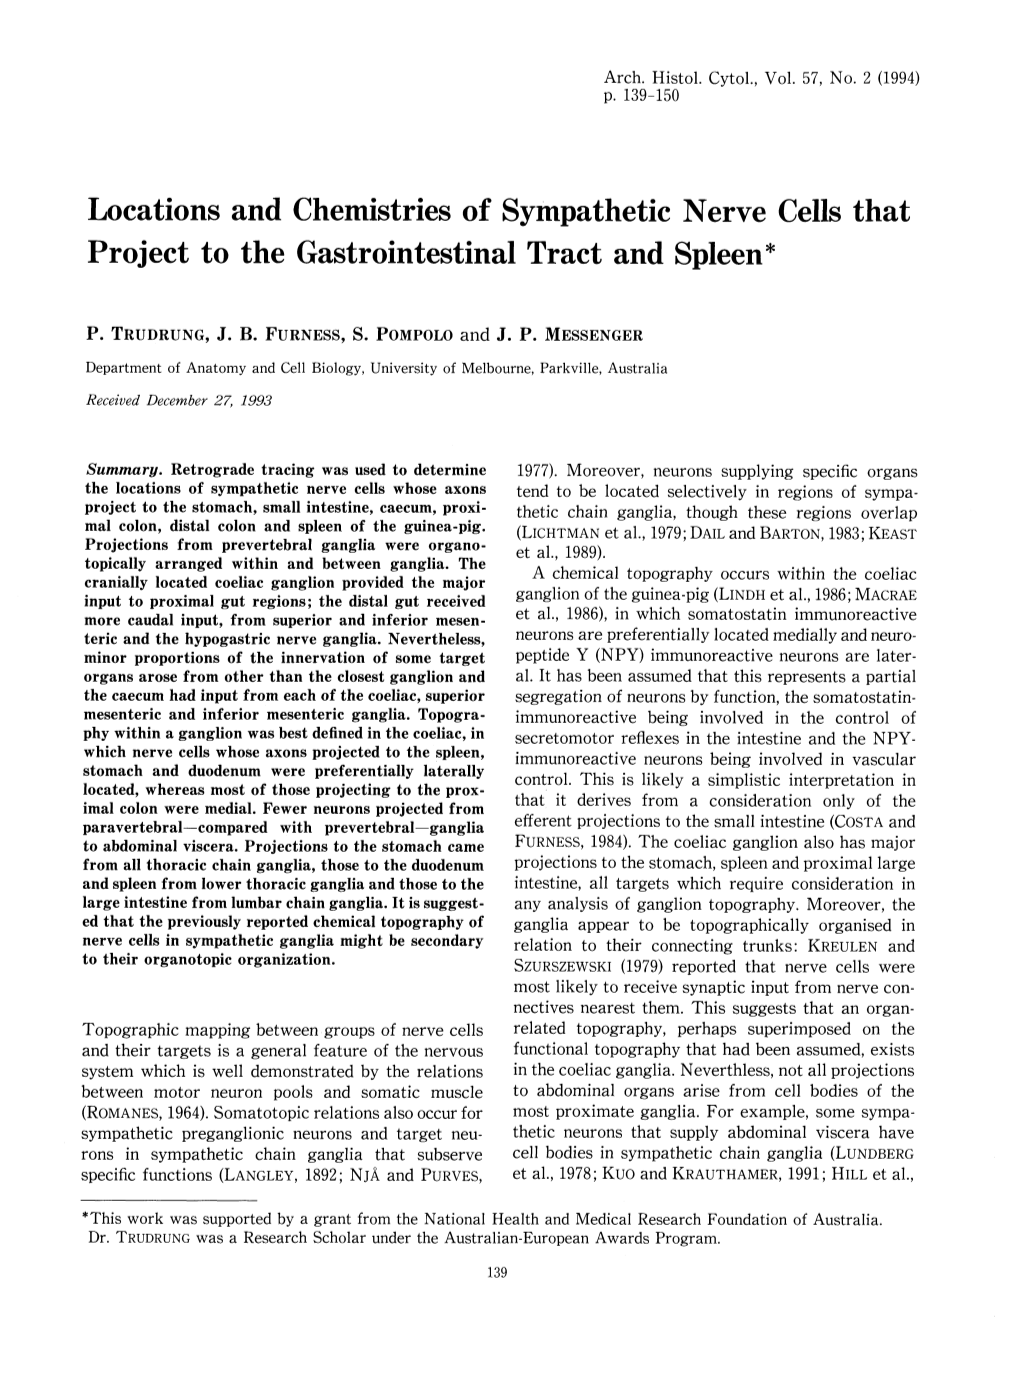 Locations and Chemistries of Sympathetic Nerve Cells That Project to the Gastrointestinal Tract and Spleen*